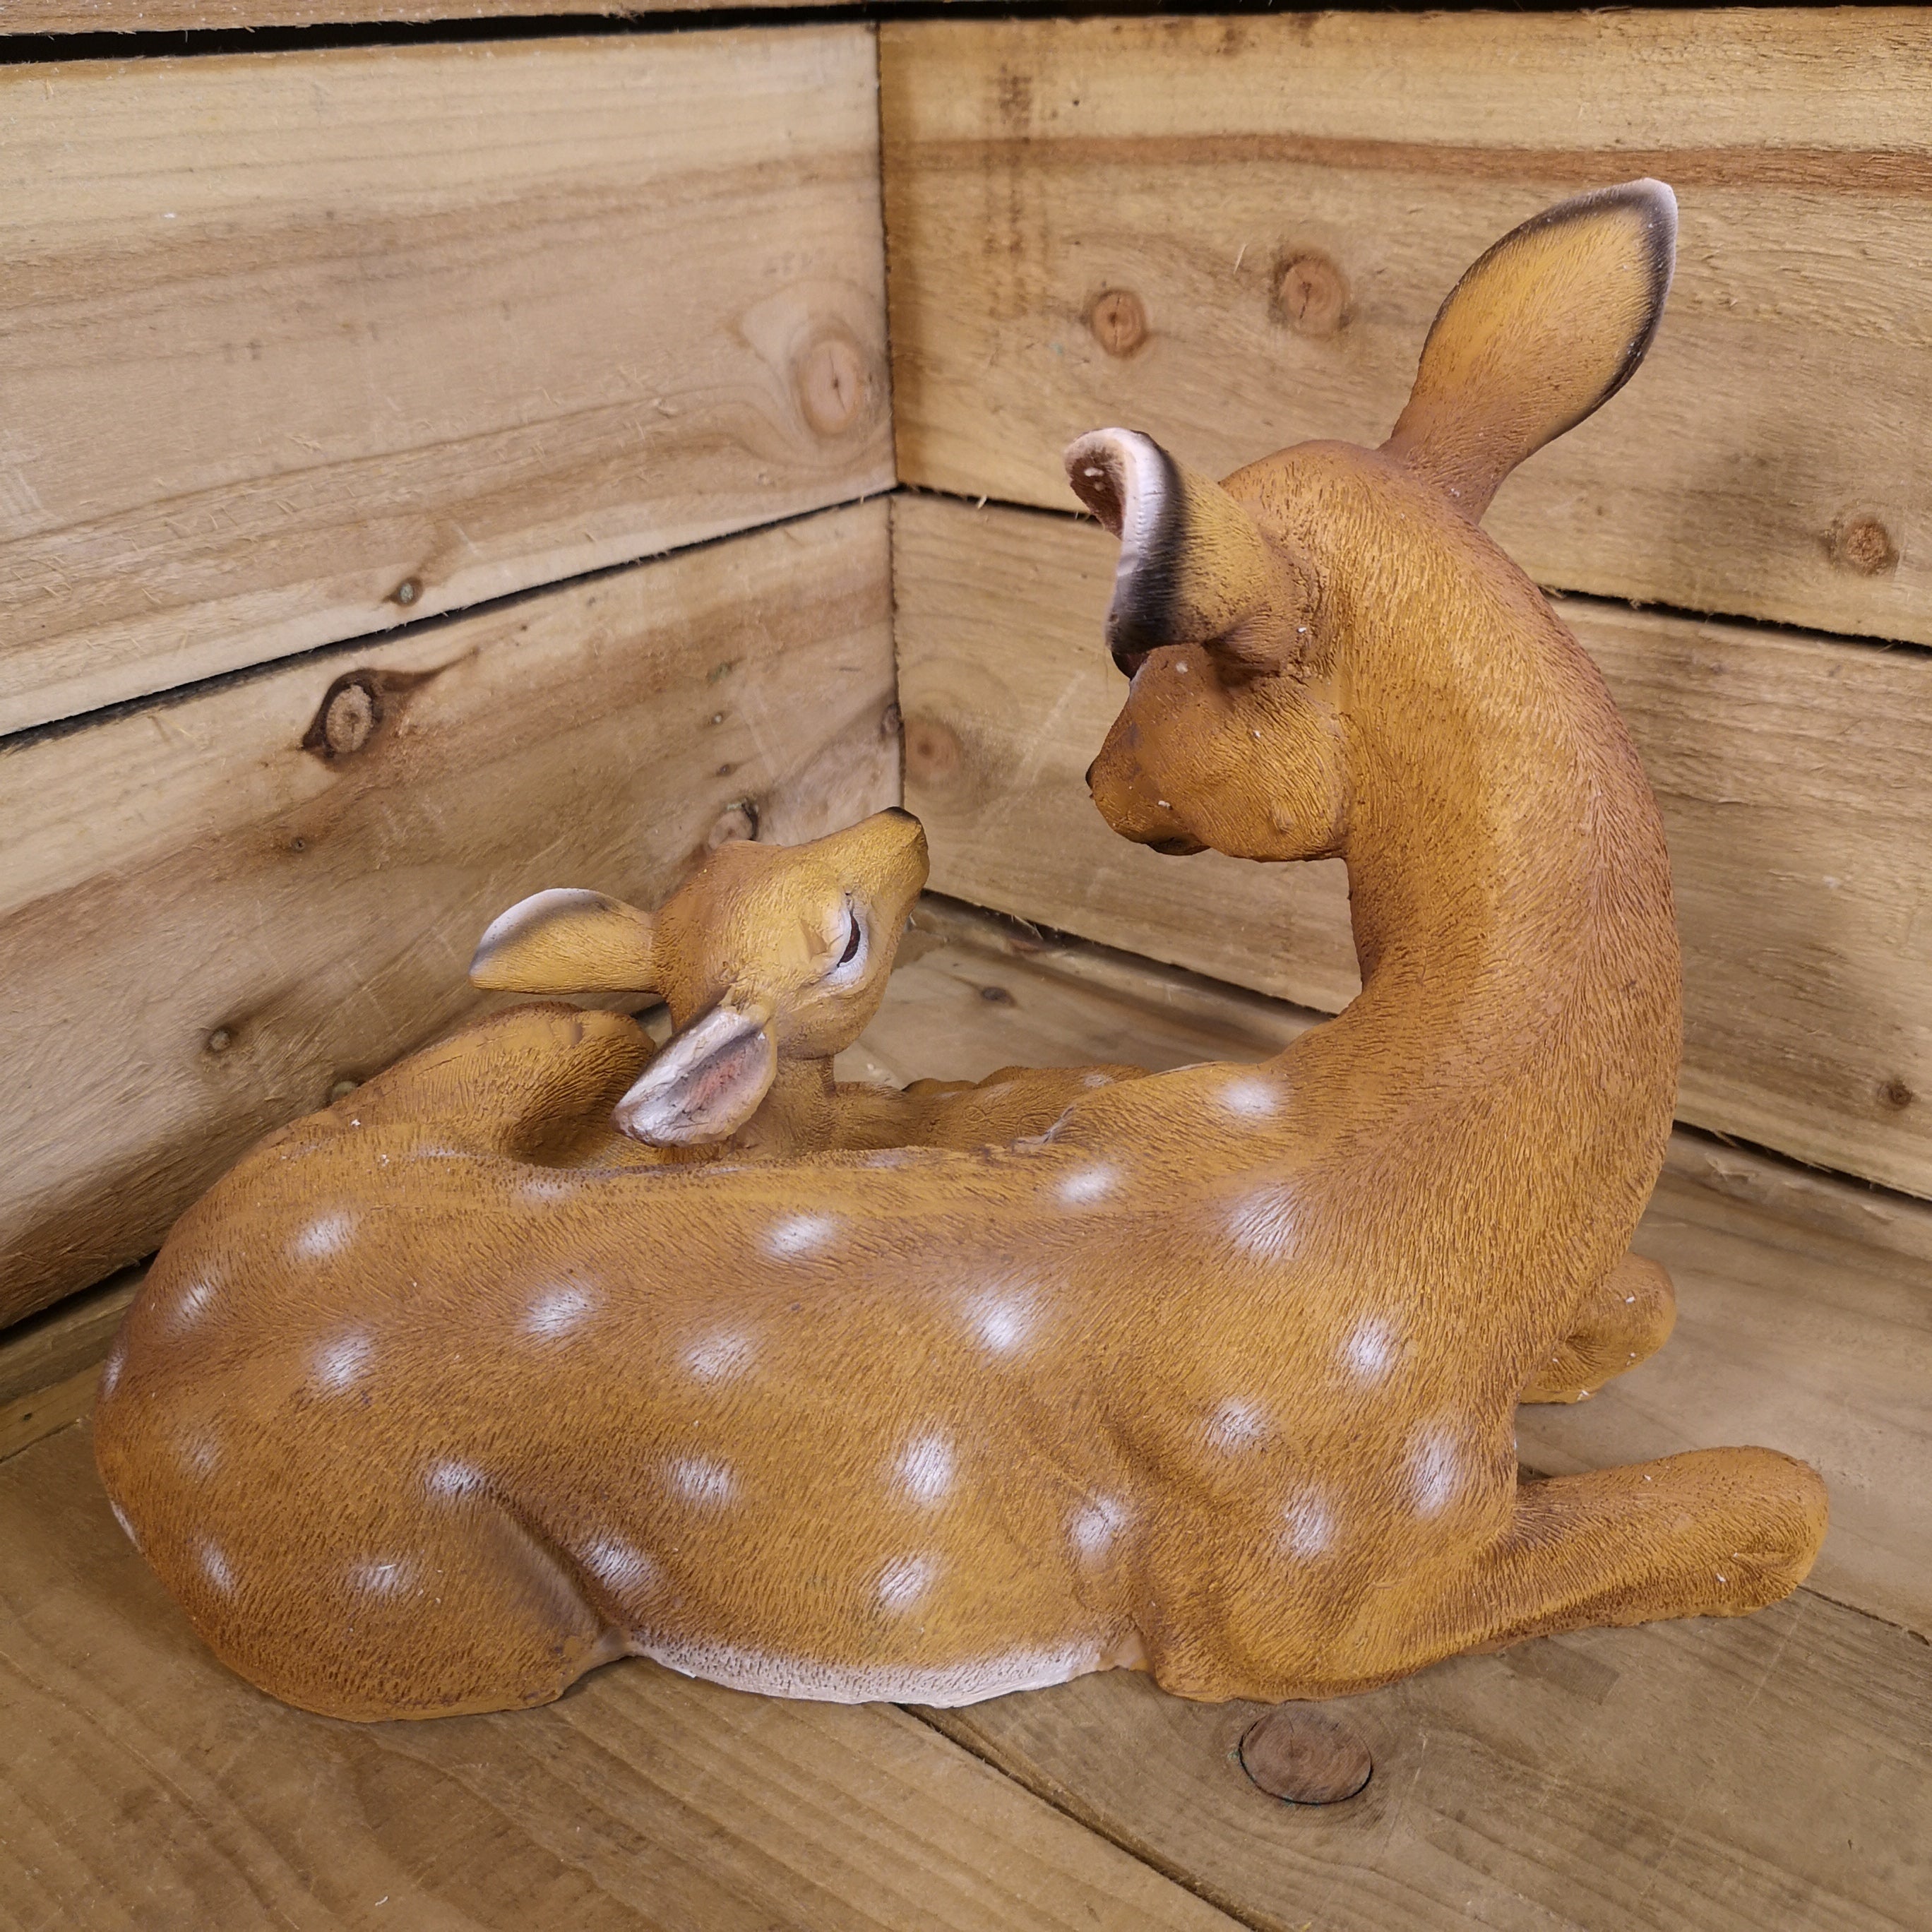 30cm Premier Christmas Resting Reindeer Doe and Fawn Mum and Baby Ornament